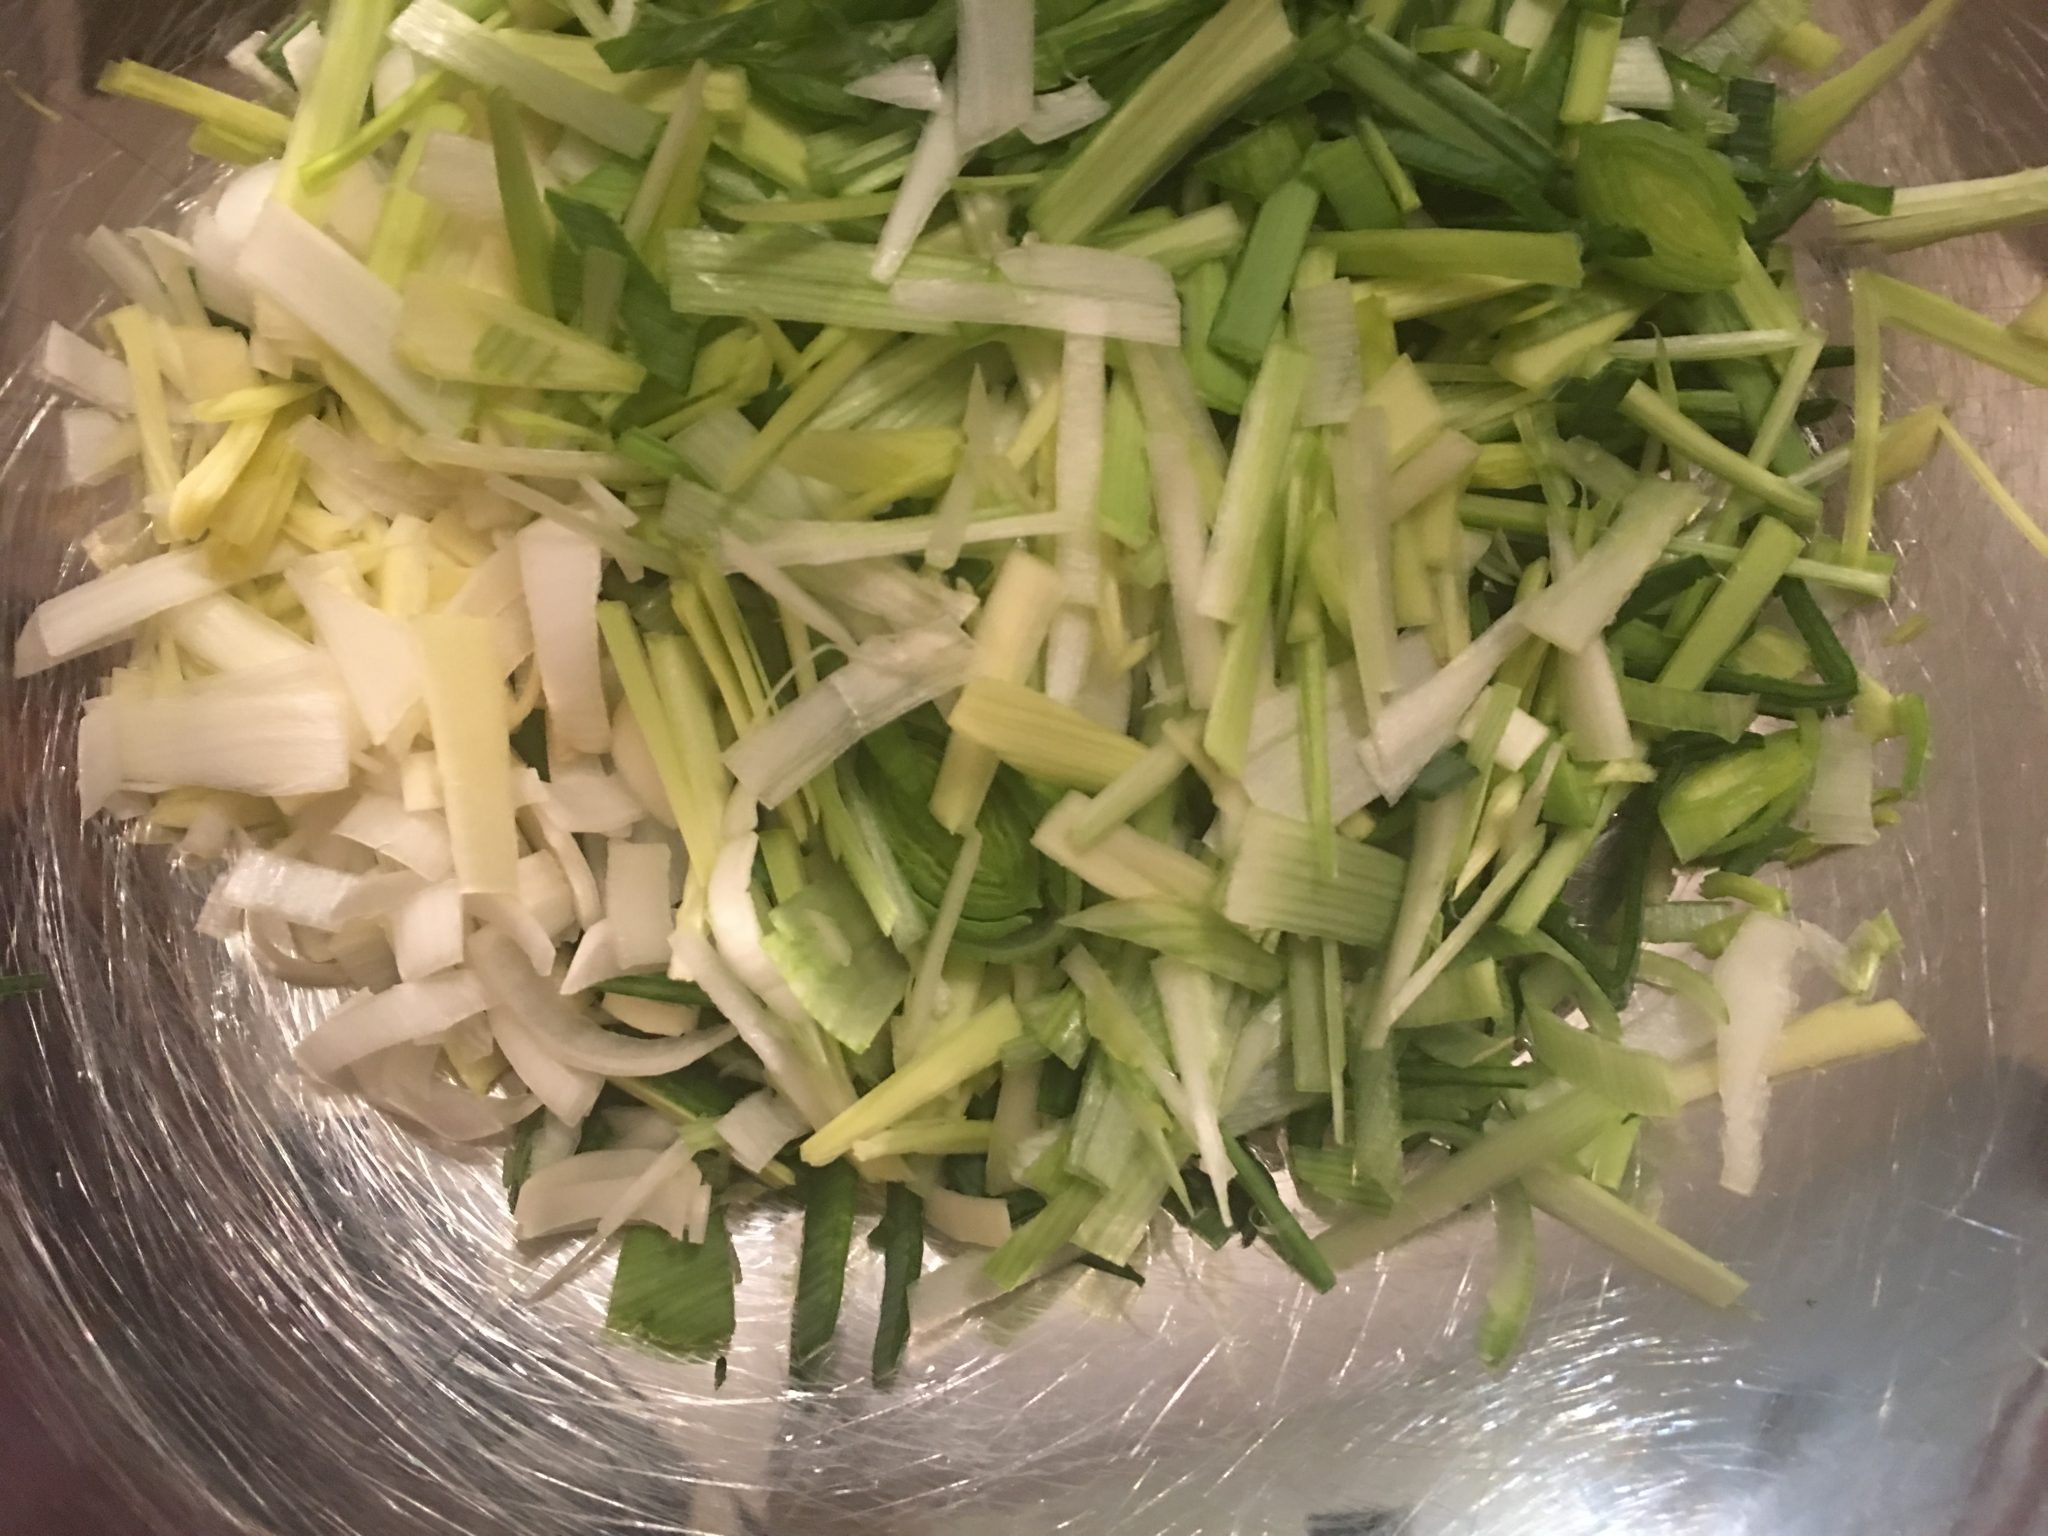 Chopped up leeks, ready to be sauteed with cabbage for this Leeks and Cabbage recipe, looking down into a big stainless steel bowl